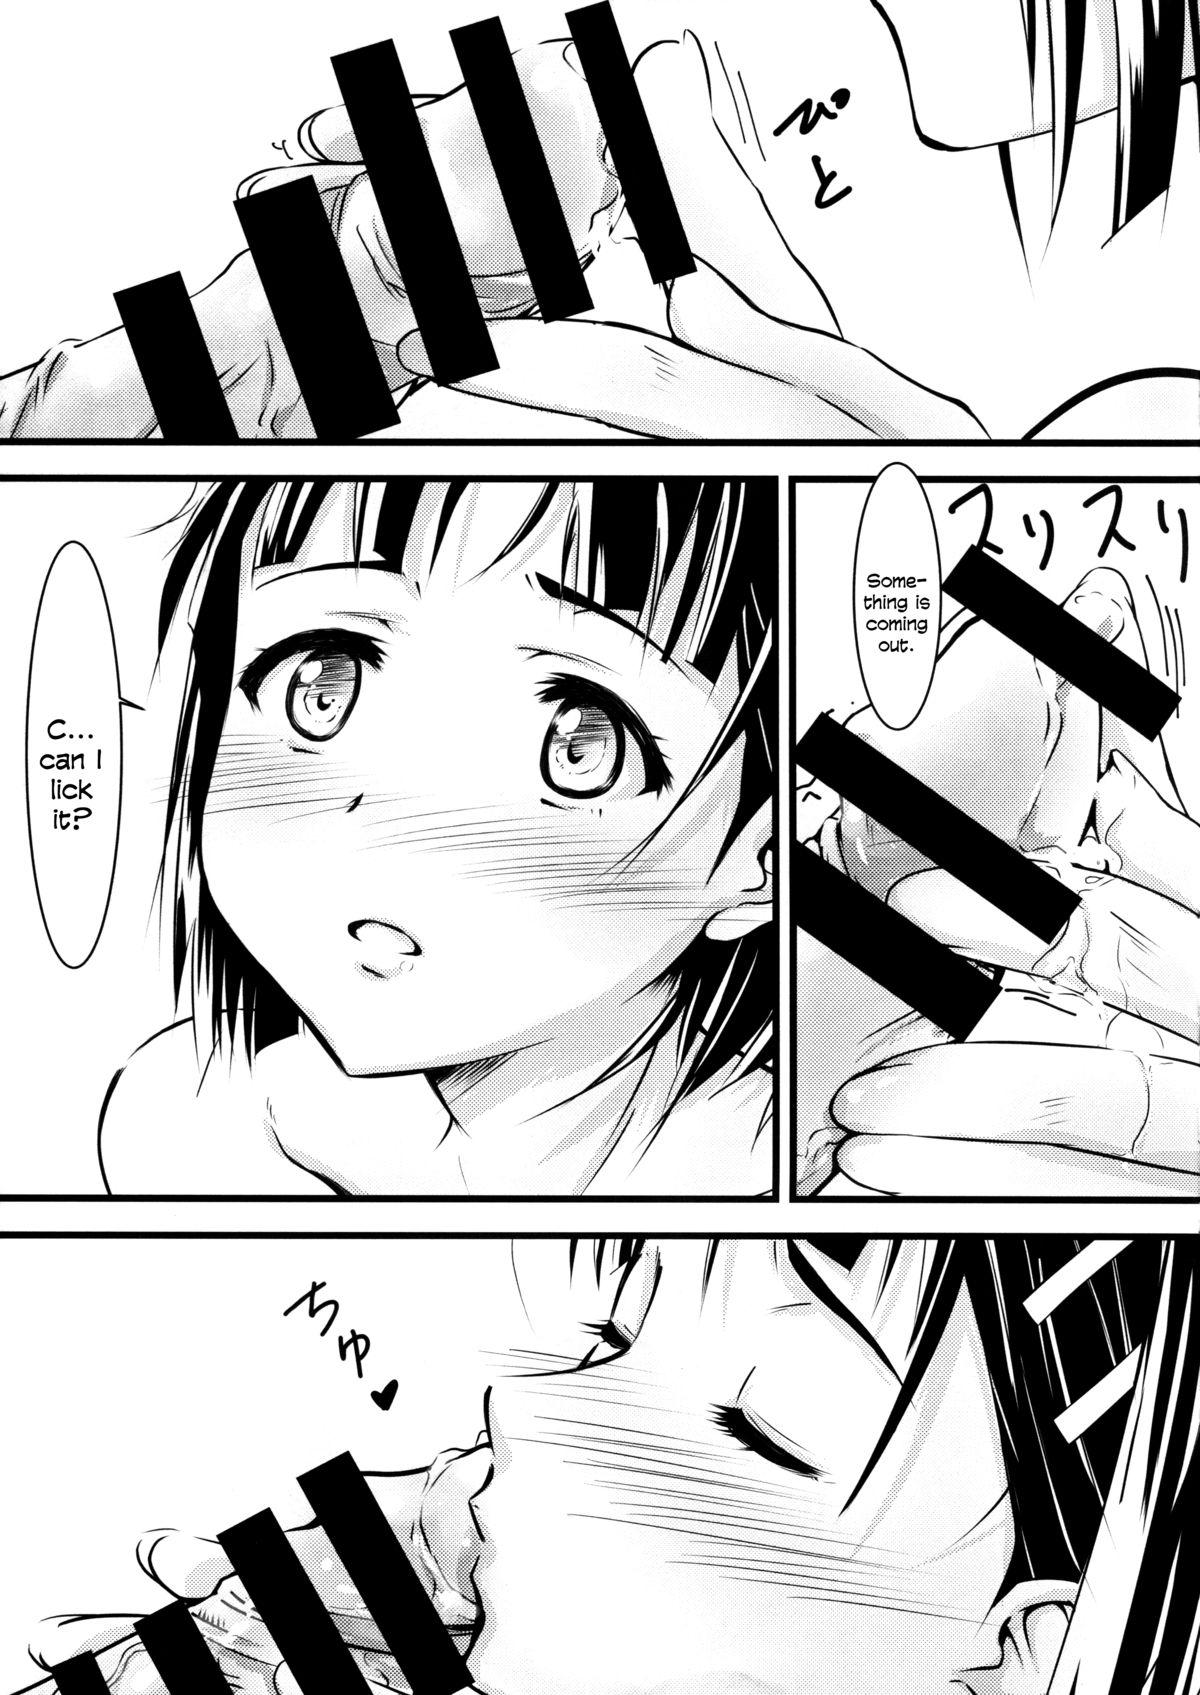 Pussy Lick Suguha - Sword art online Rope - Page 6